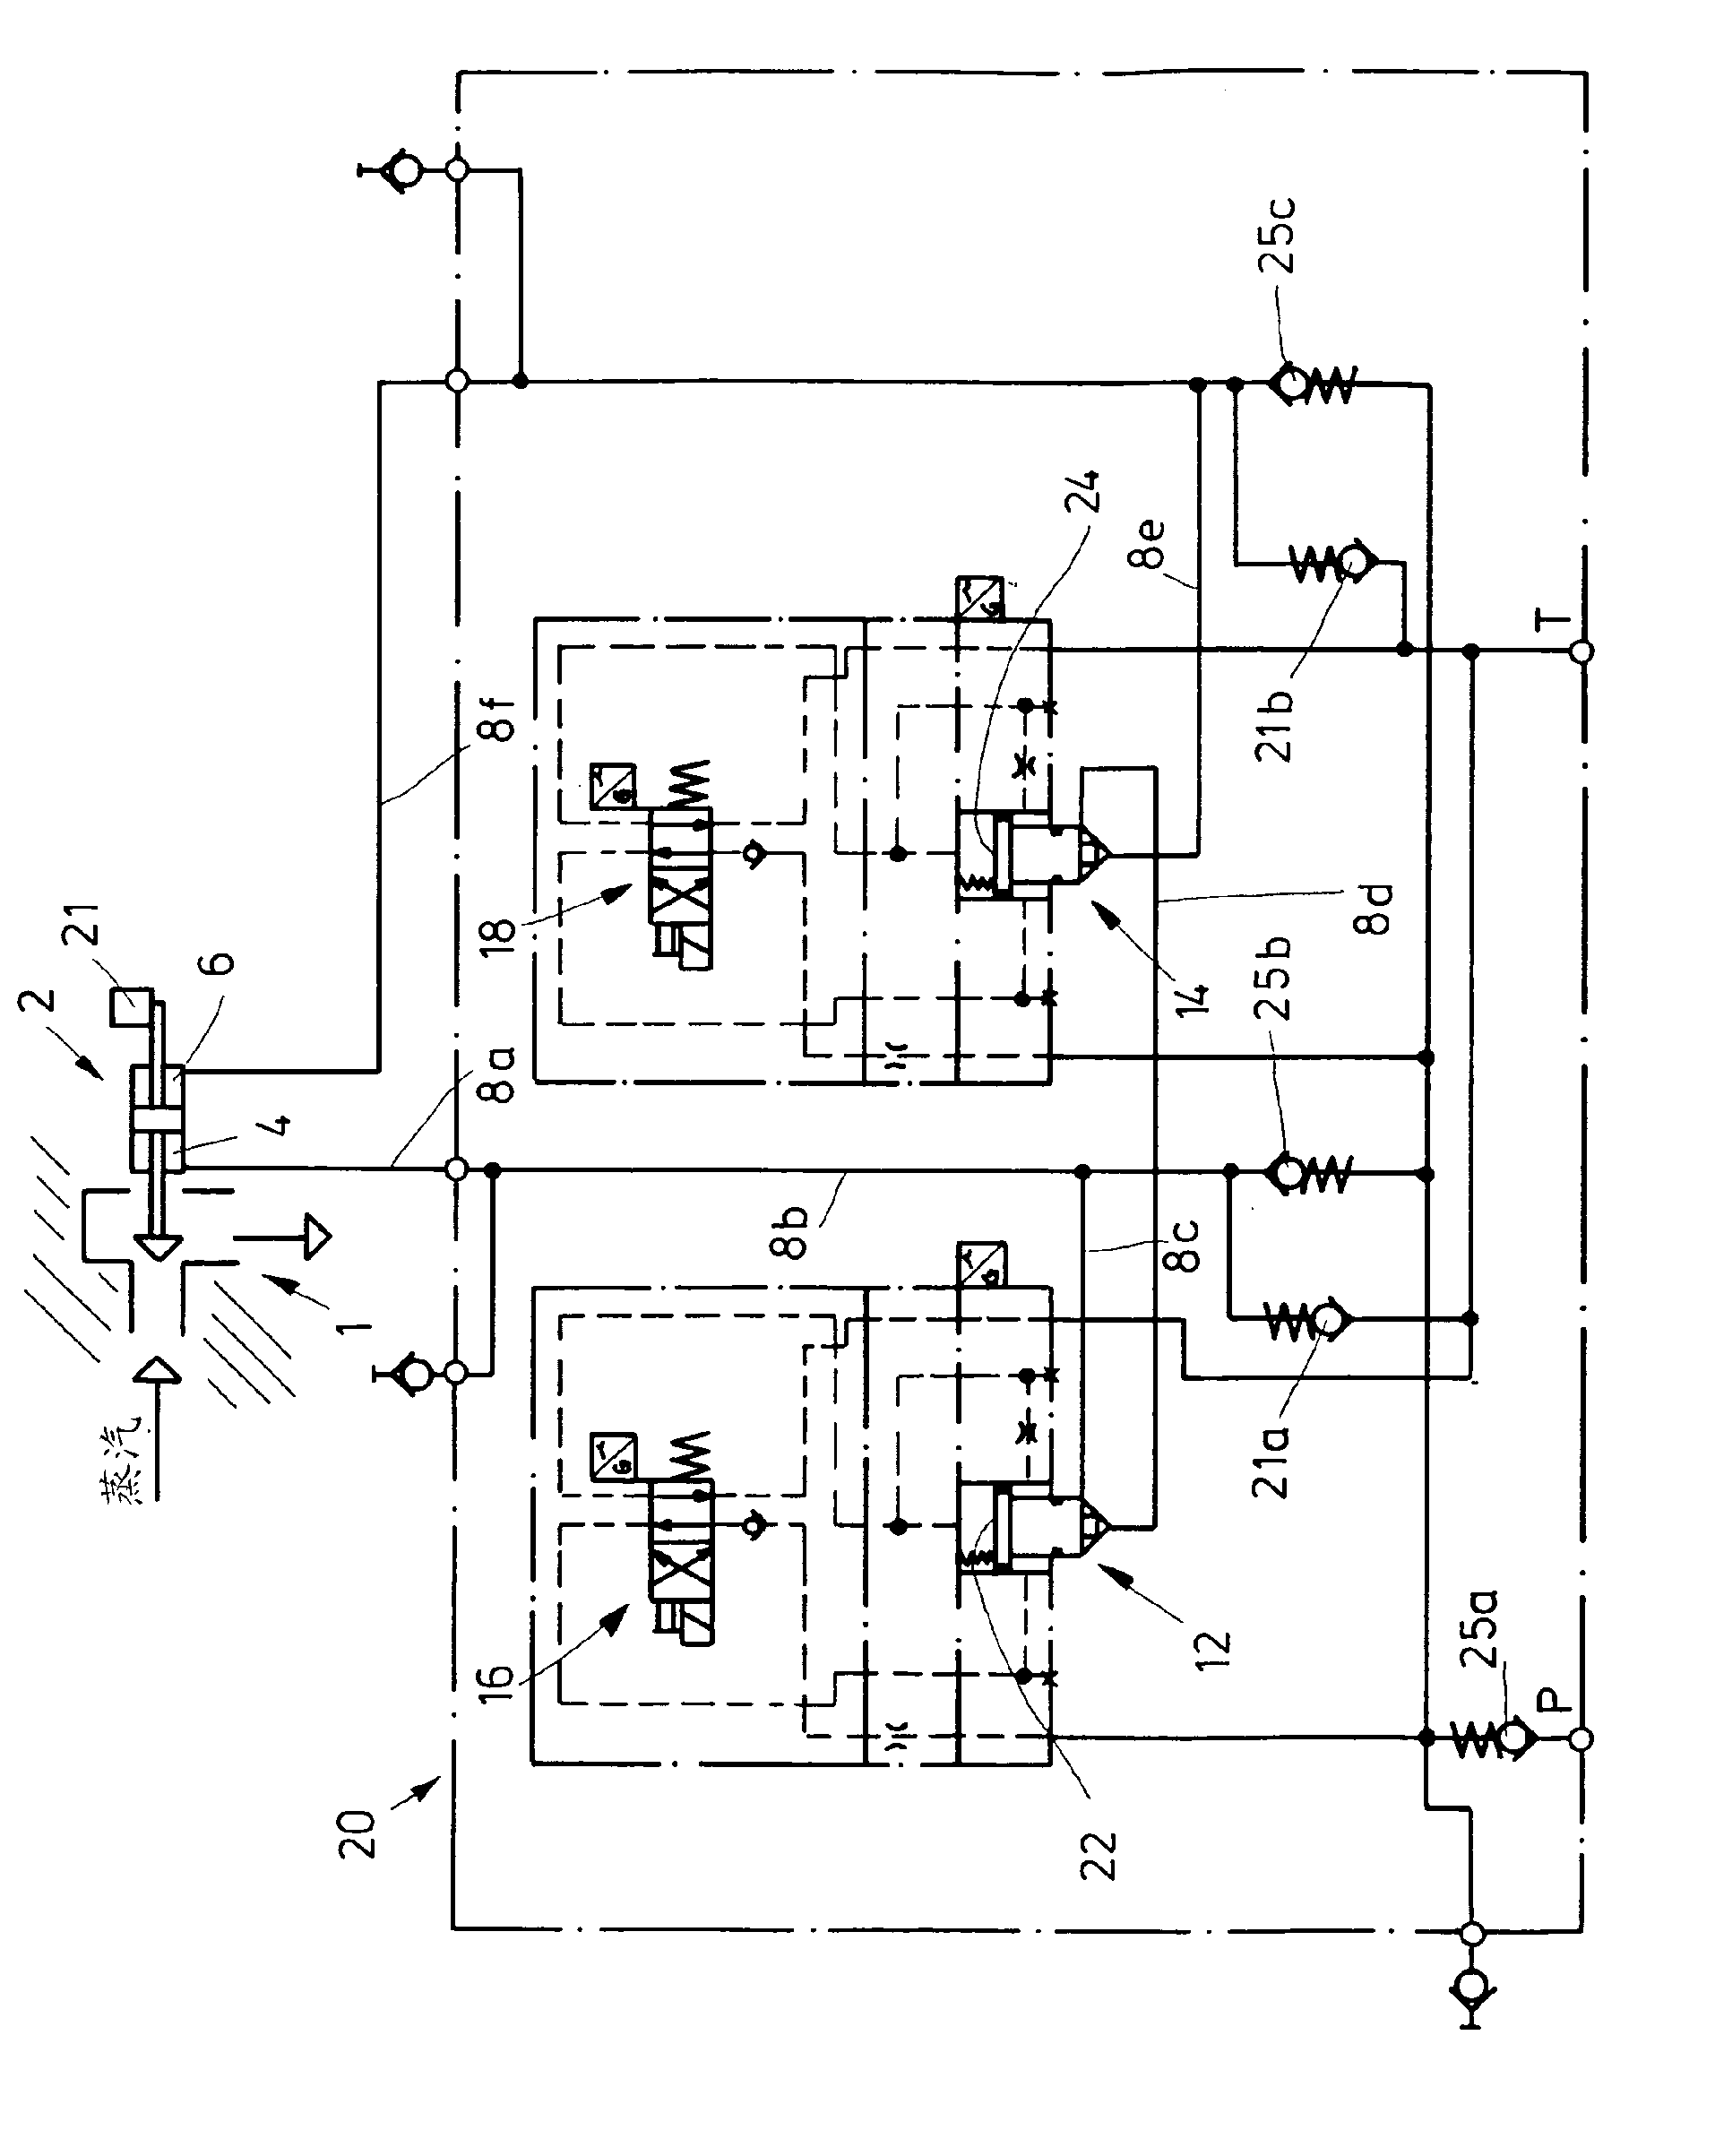 Hydraulic or pneumatic drive for actuating a fitting comprising a control valve or selector valve